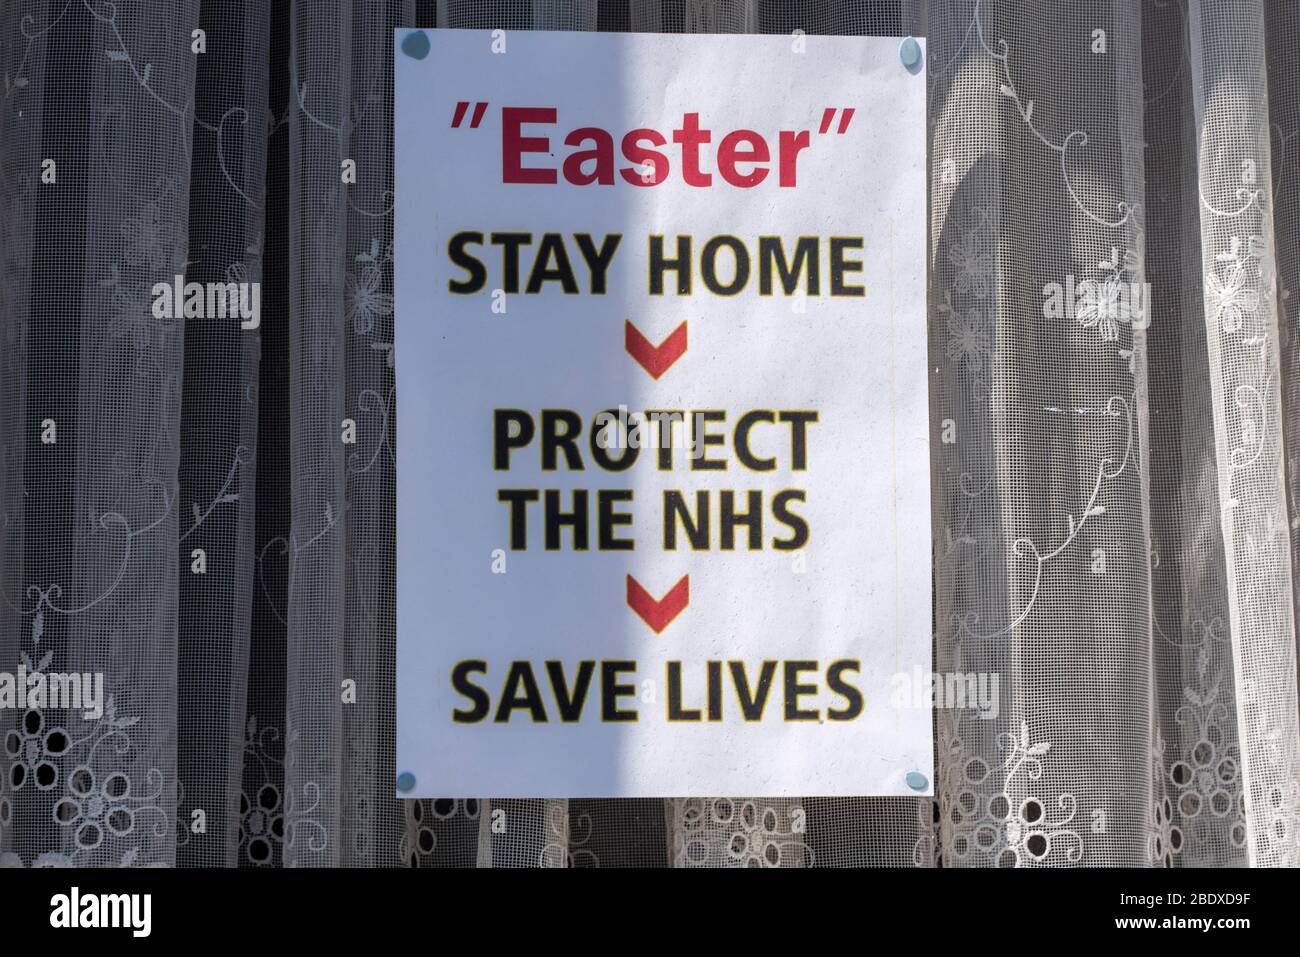 Southend on Sea, Essex, UK. 10th Apr, 2020. On the first day of the Easter weekend during the COVID-19 Coronavirus lockdown period people are making use of Southend on Sea’s seafront to enjoy the sunny and warm weather. A sign in a house window states Easter, stay home, protect the nhs, save lives Stock Photo